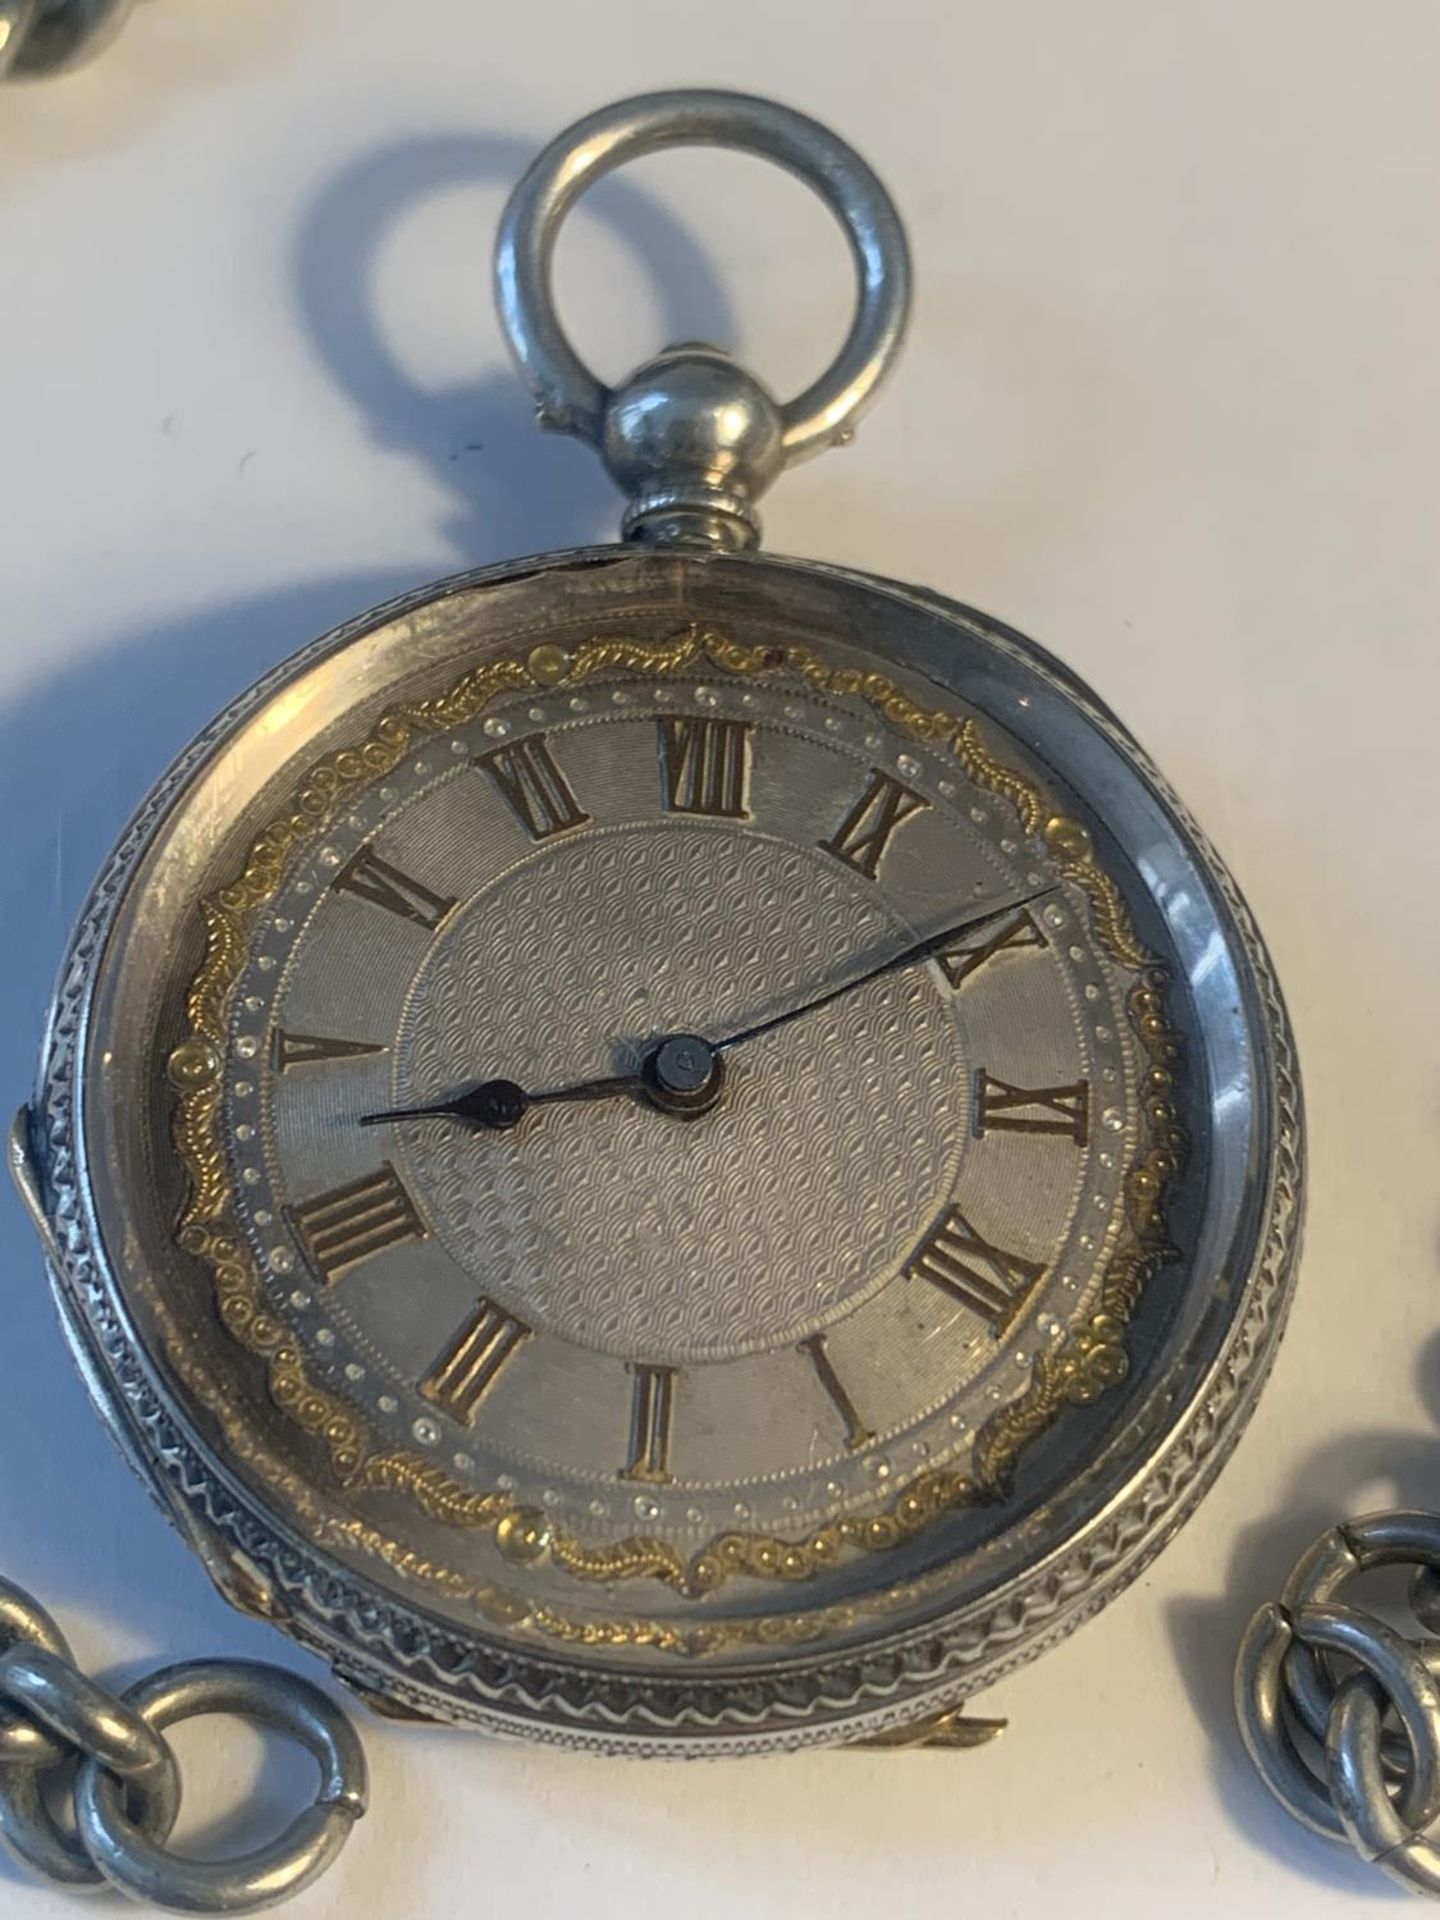 A MARKED FINE SILVER POCKET WATCH WITH DECORATIVE FACE AND A CHAIN - Image 2 of 6